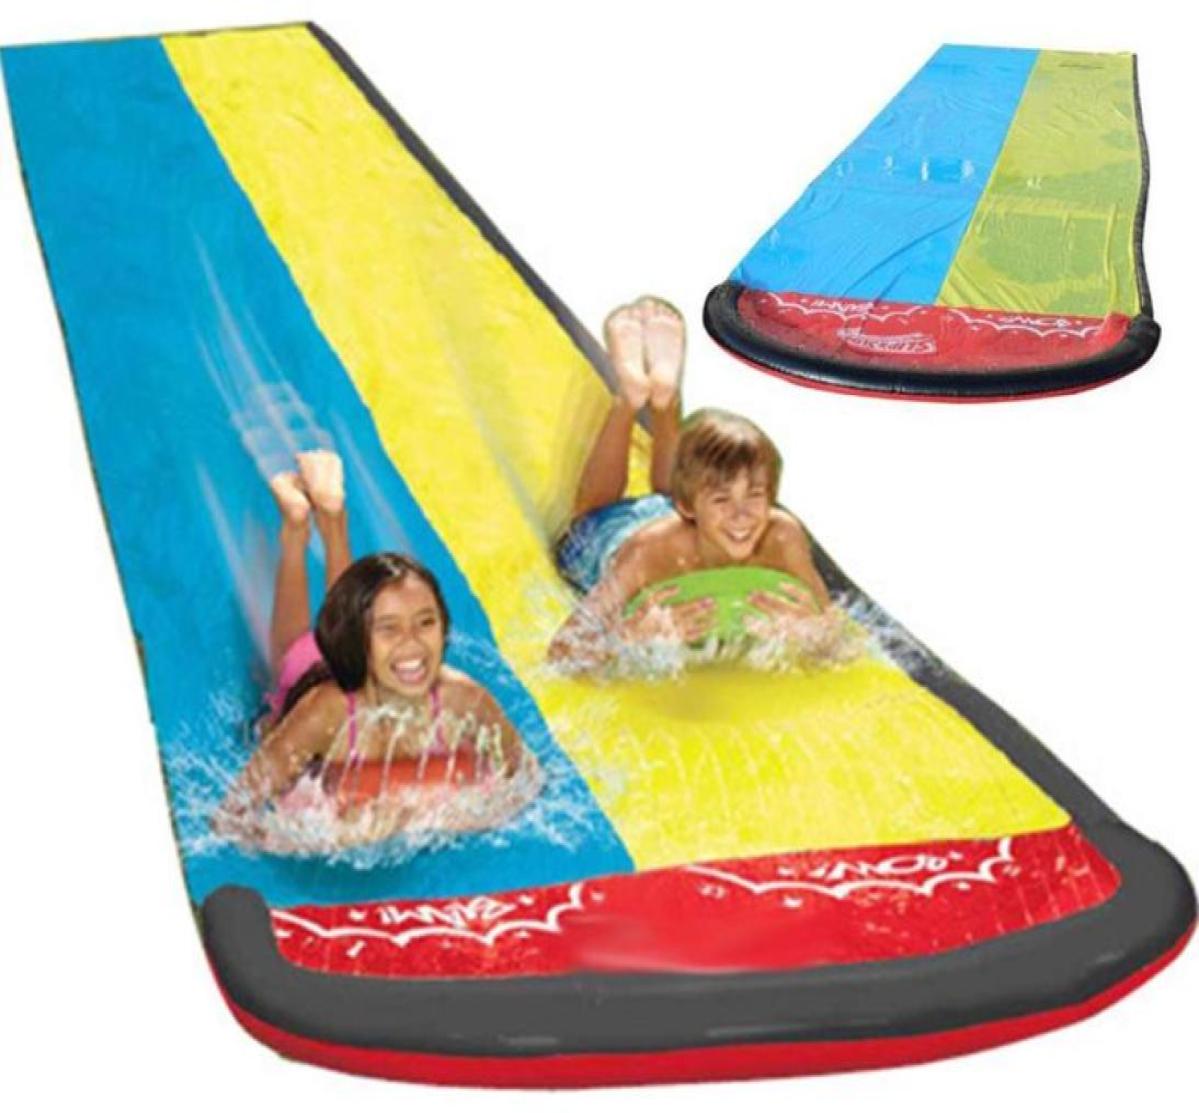 

Pool Accessories Games Center Backyard Children Adult Toys Inflatable Water Slide Pools Kids Summer Gifts Outdoor4241090